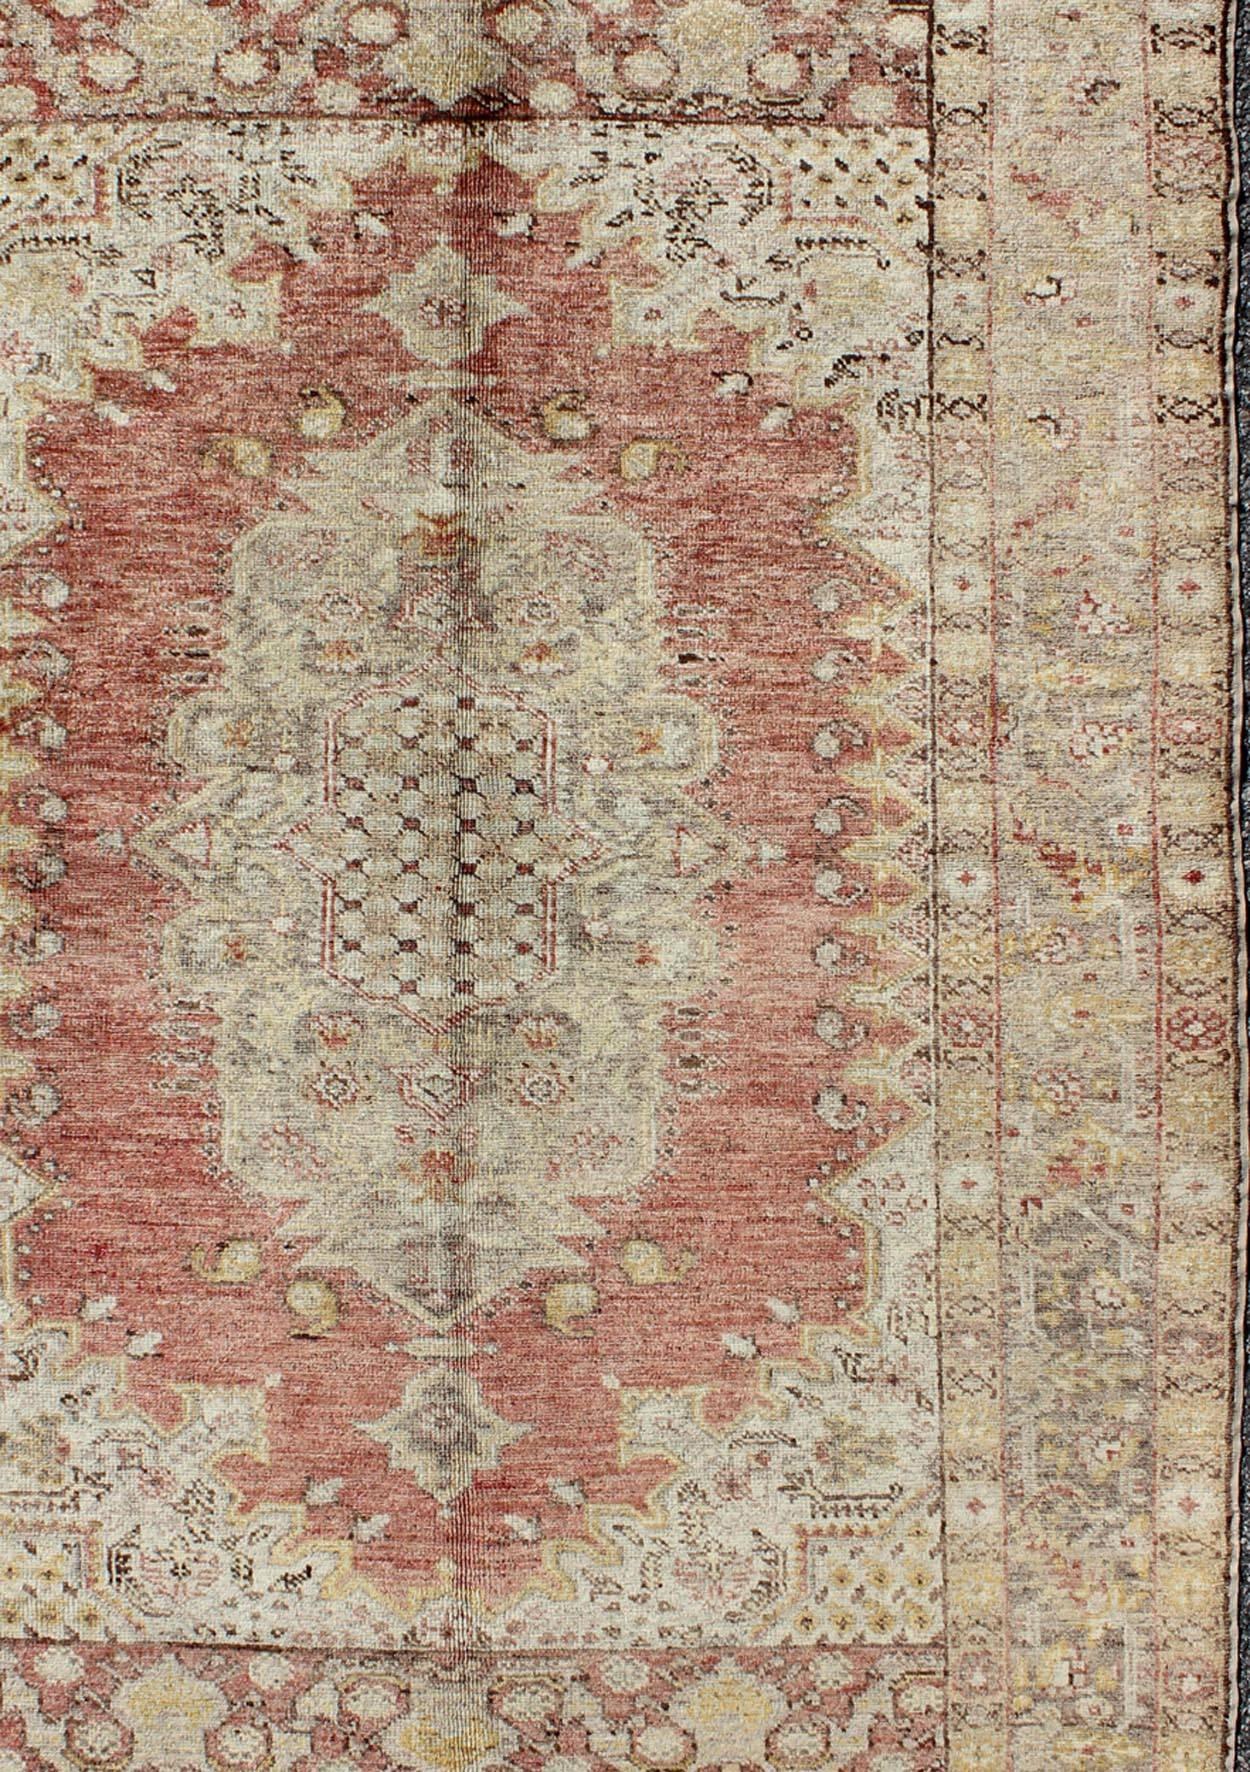 Oushak Antique Turkish Sevas Rug with Fine Weave in Cream, Sand and Red